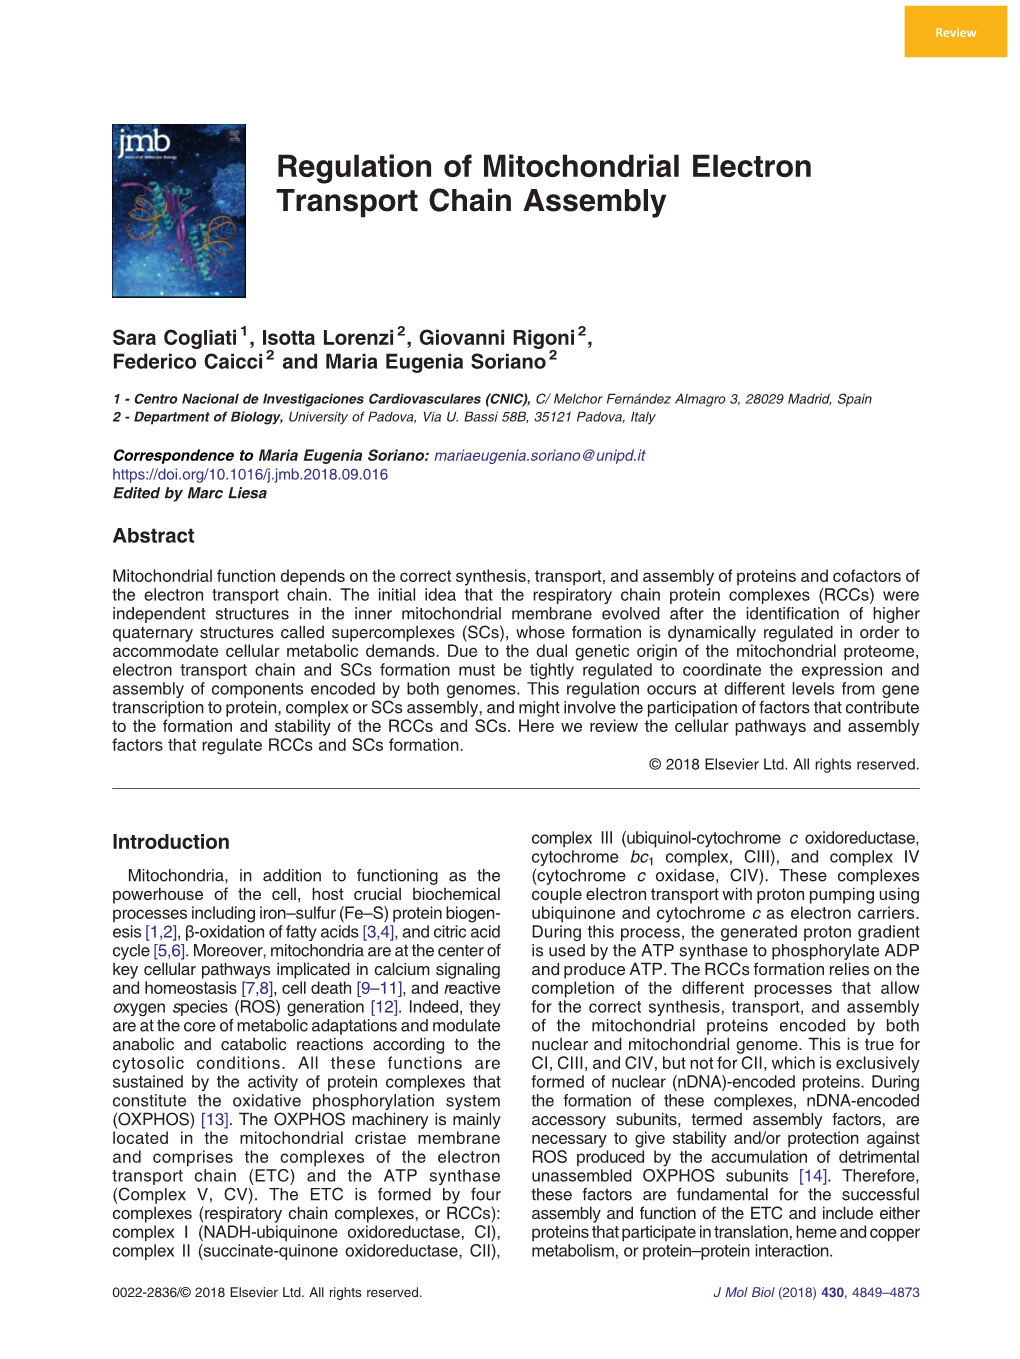 Regulation of Mitochondrial Electron Transport Chain Assembly